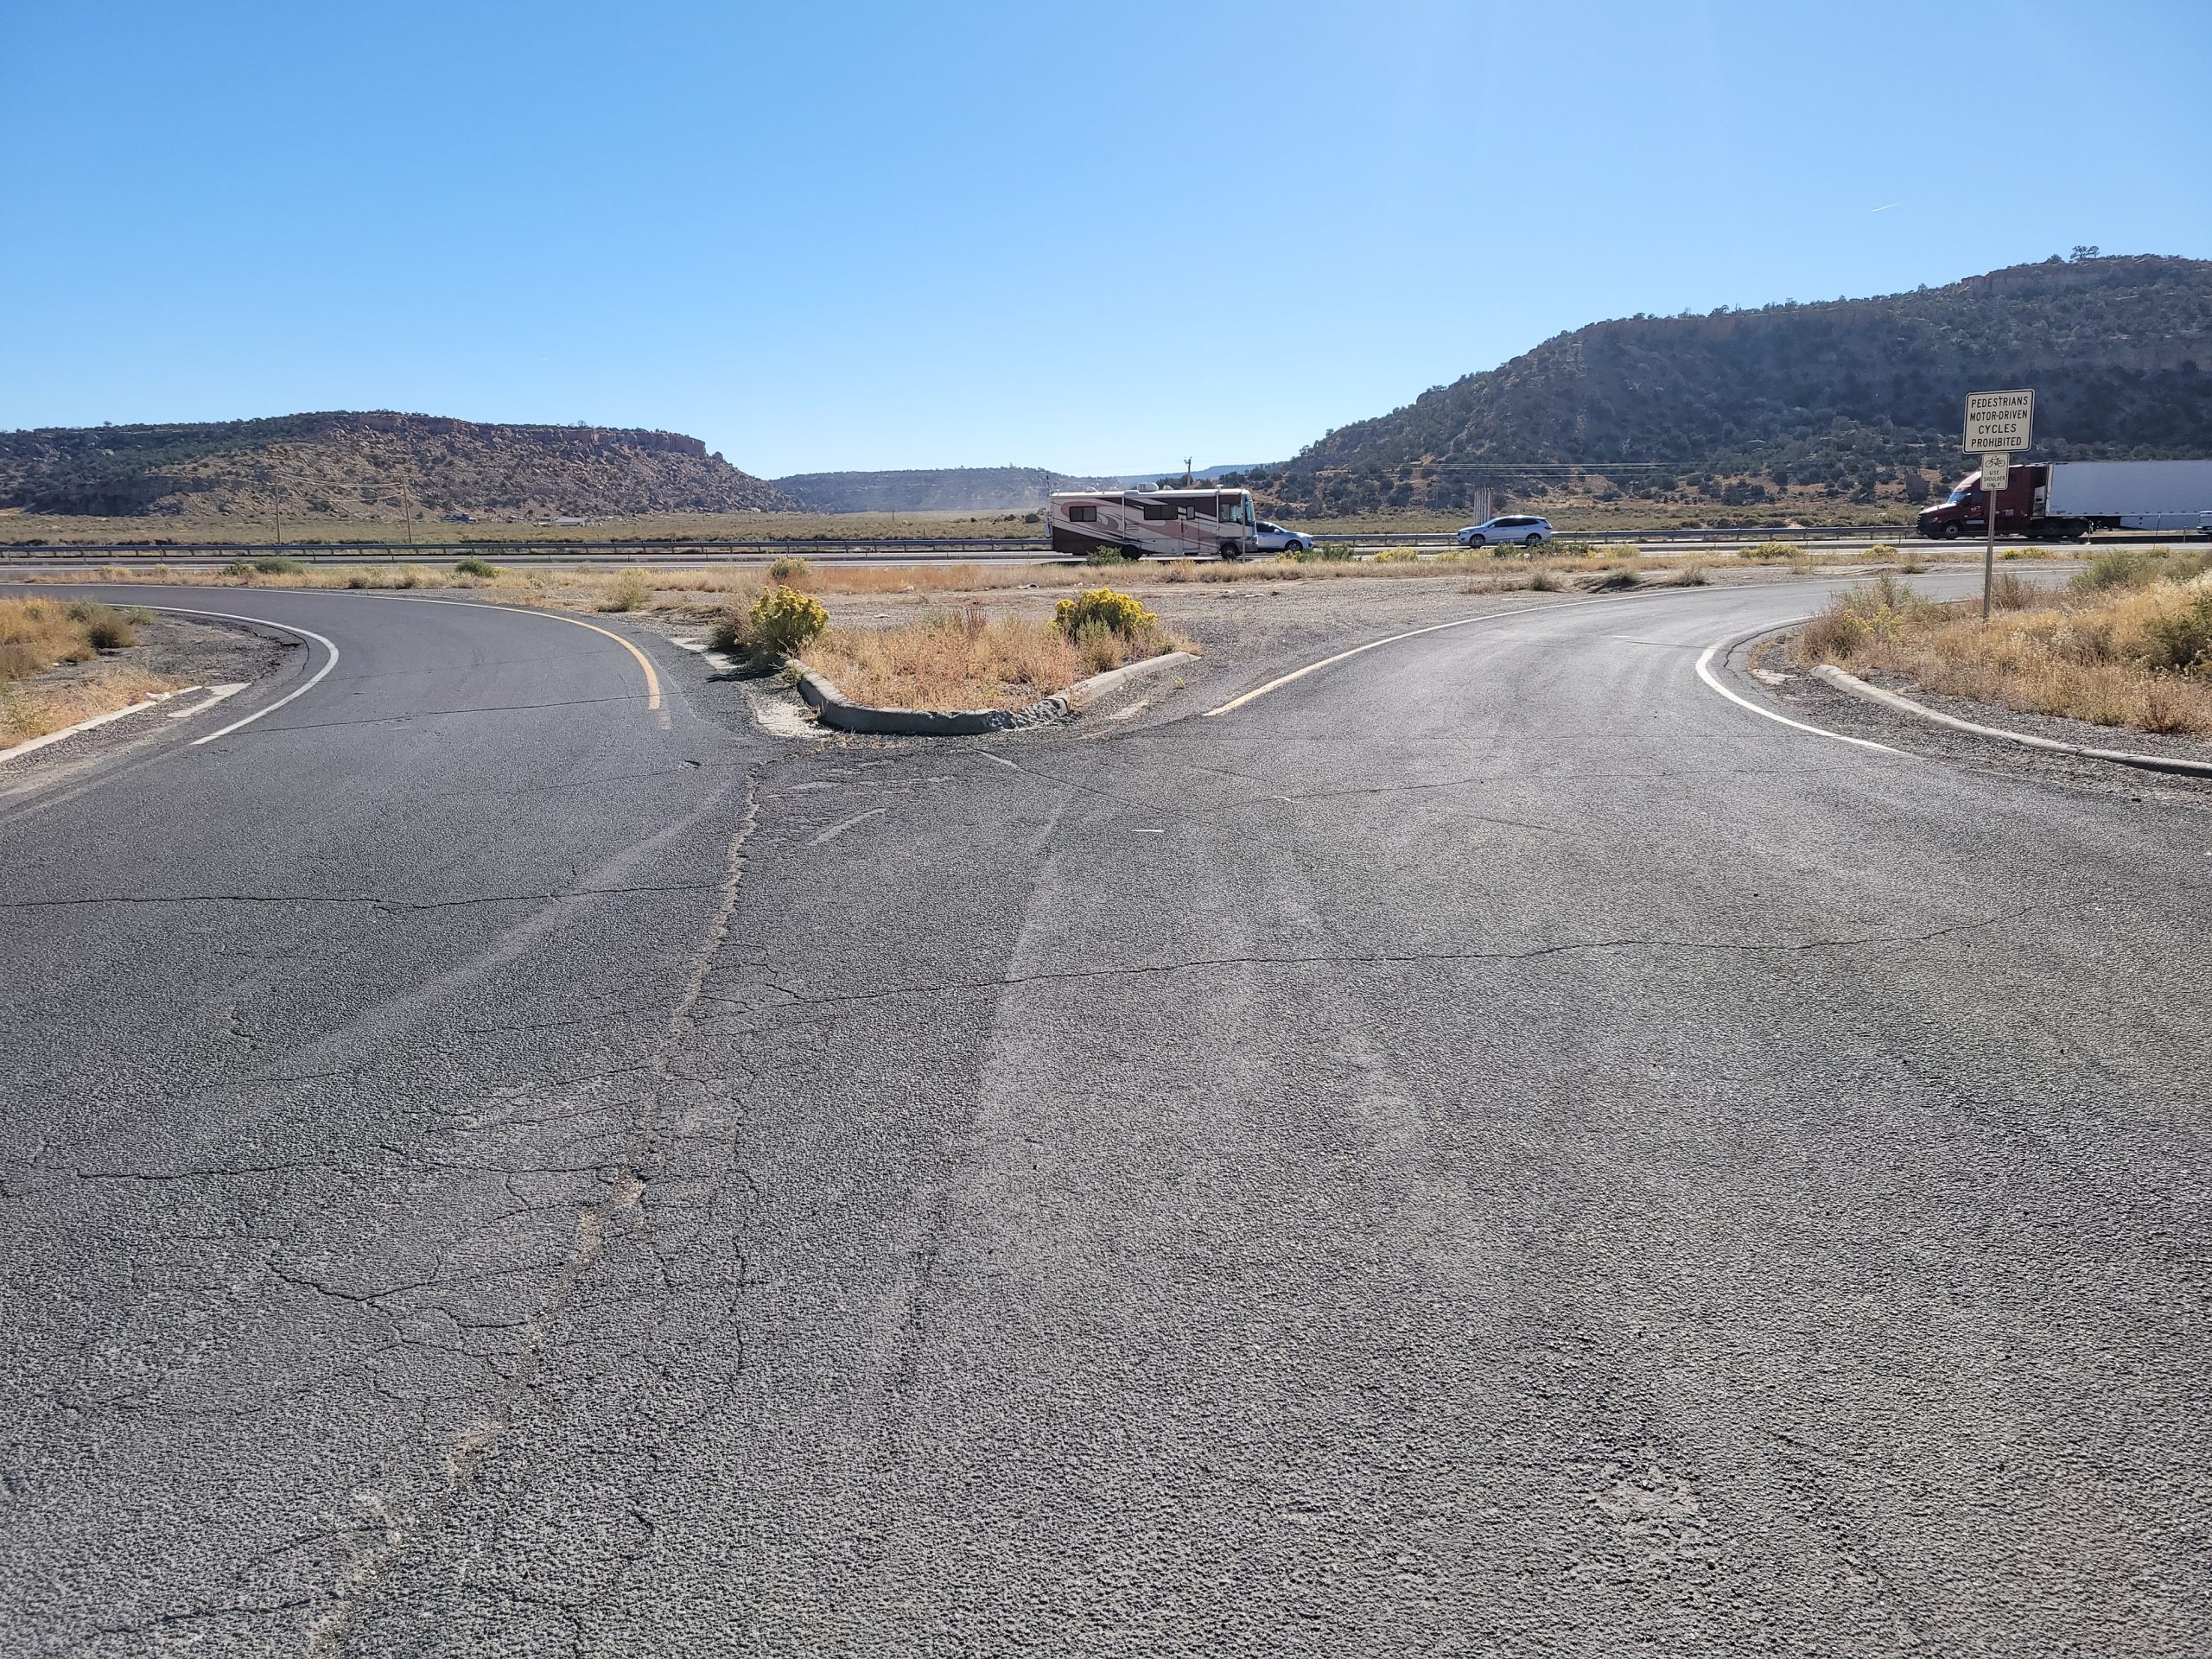 view of roadway from NM 118 at the intersection of I-40 westbound off-ramp and I-40 westbound on-ramp